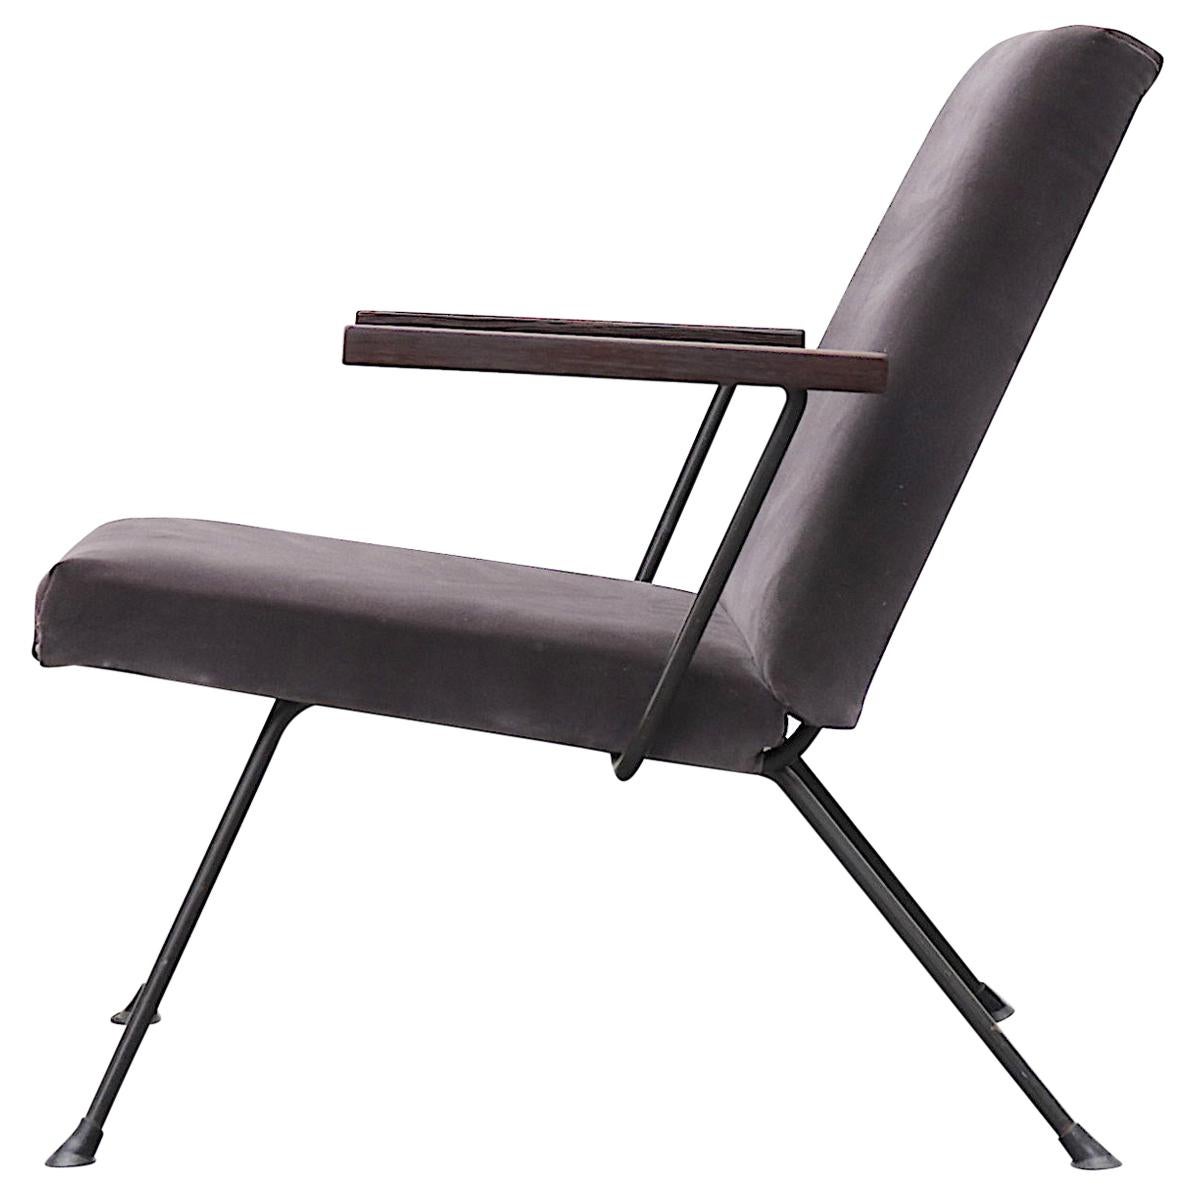 Gispen Kembo Lounge Chair upholstered in Dark Grey Velvet, with Original Black Metal Frame, and Lightly Refinished Wenge Arms. Original Condition with Signs of Wear Consistent with its Age and Use. Other Kembo Lounge Chairs Available, Listed